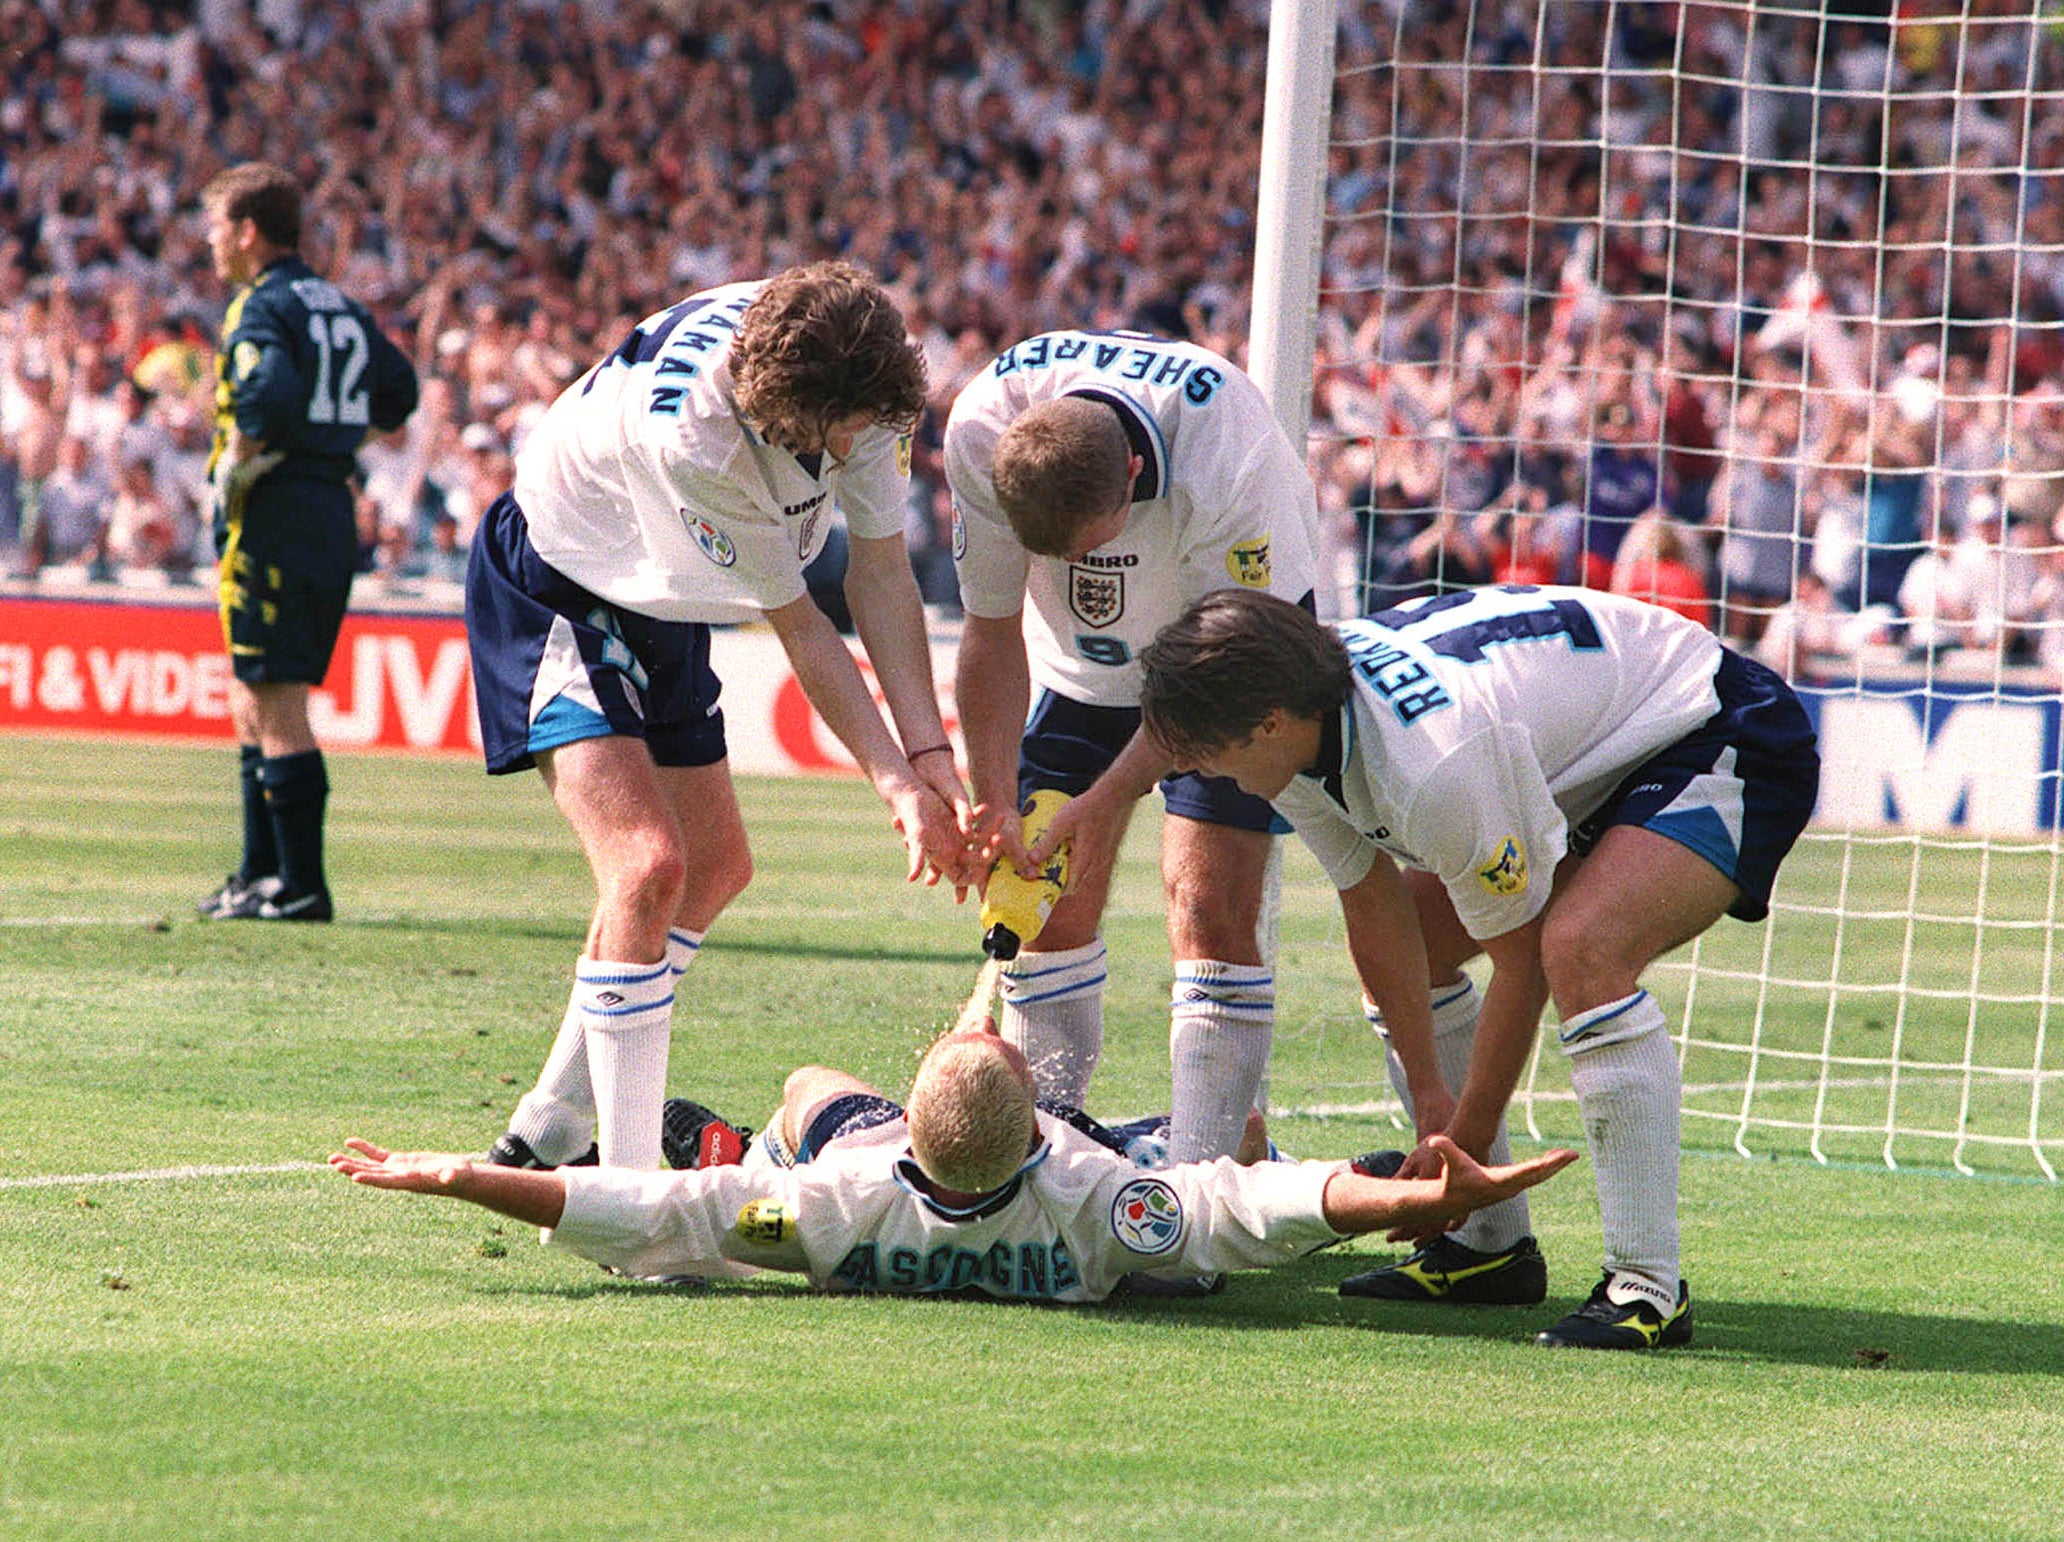 Euro 96 holds a special place in the national sporting consciousness